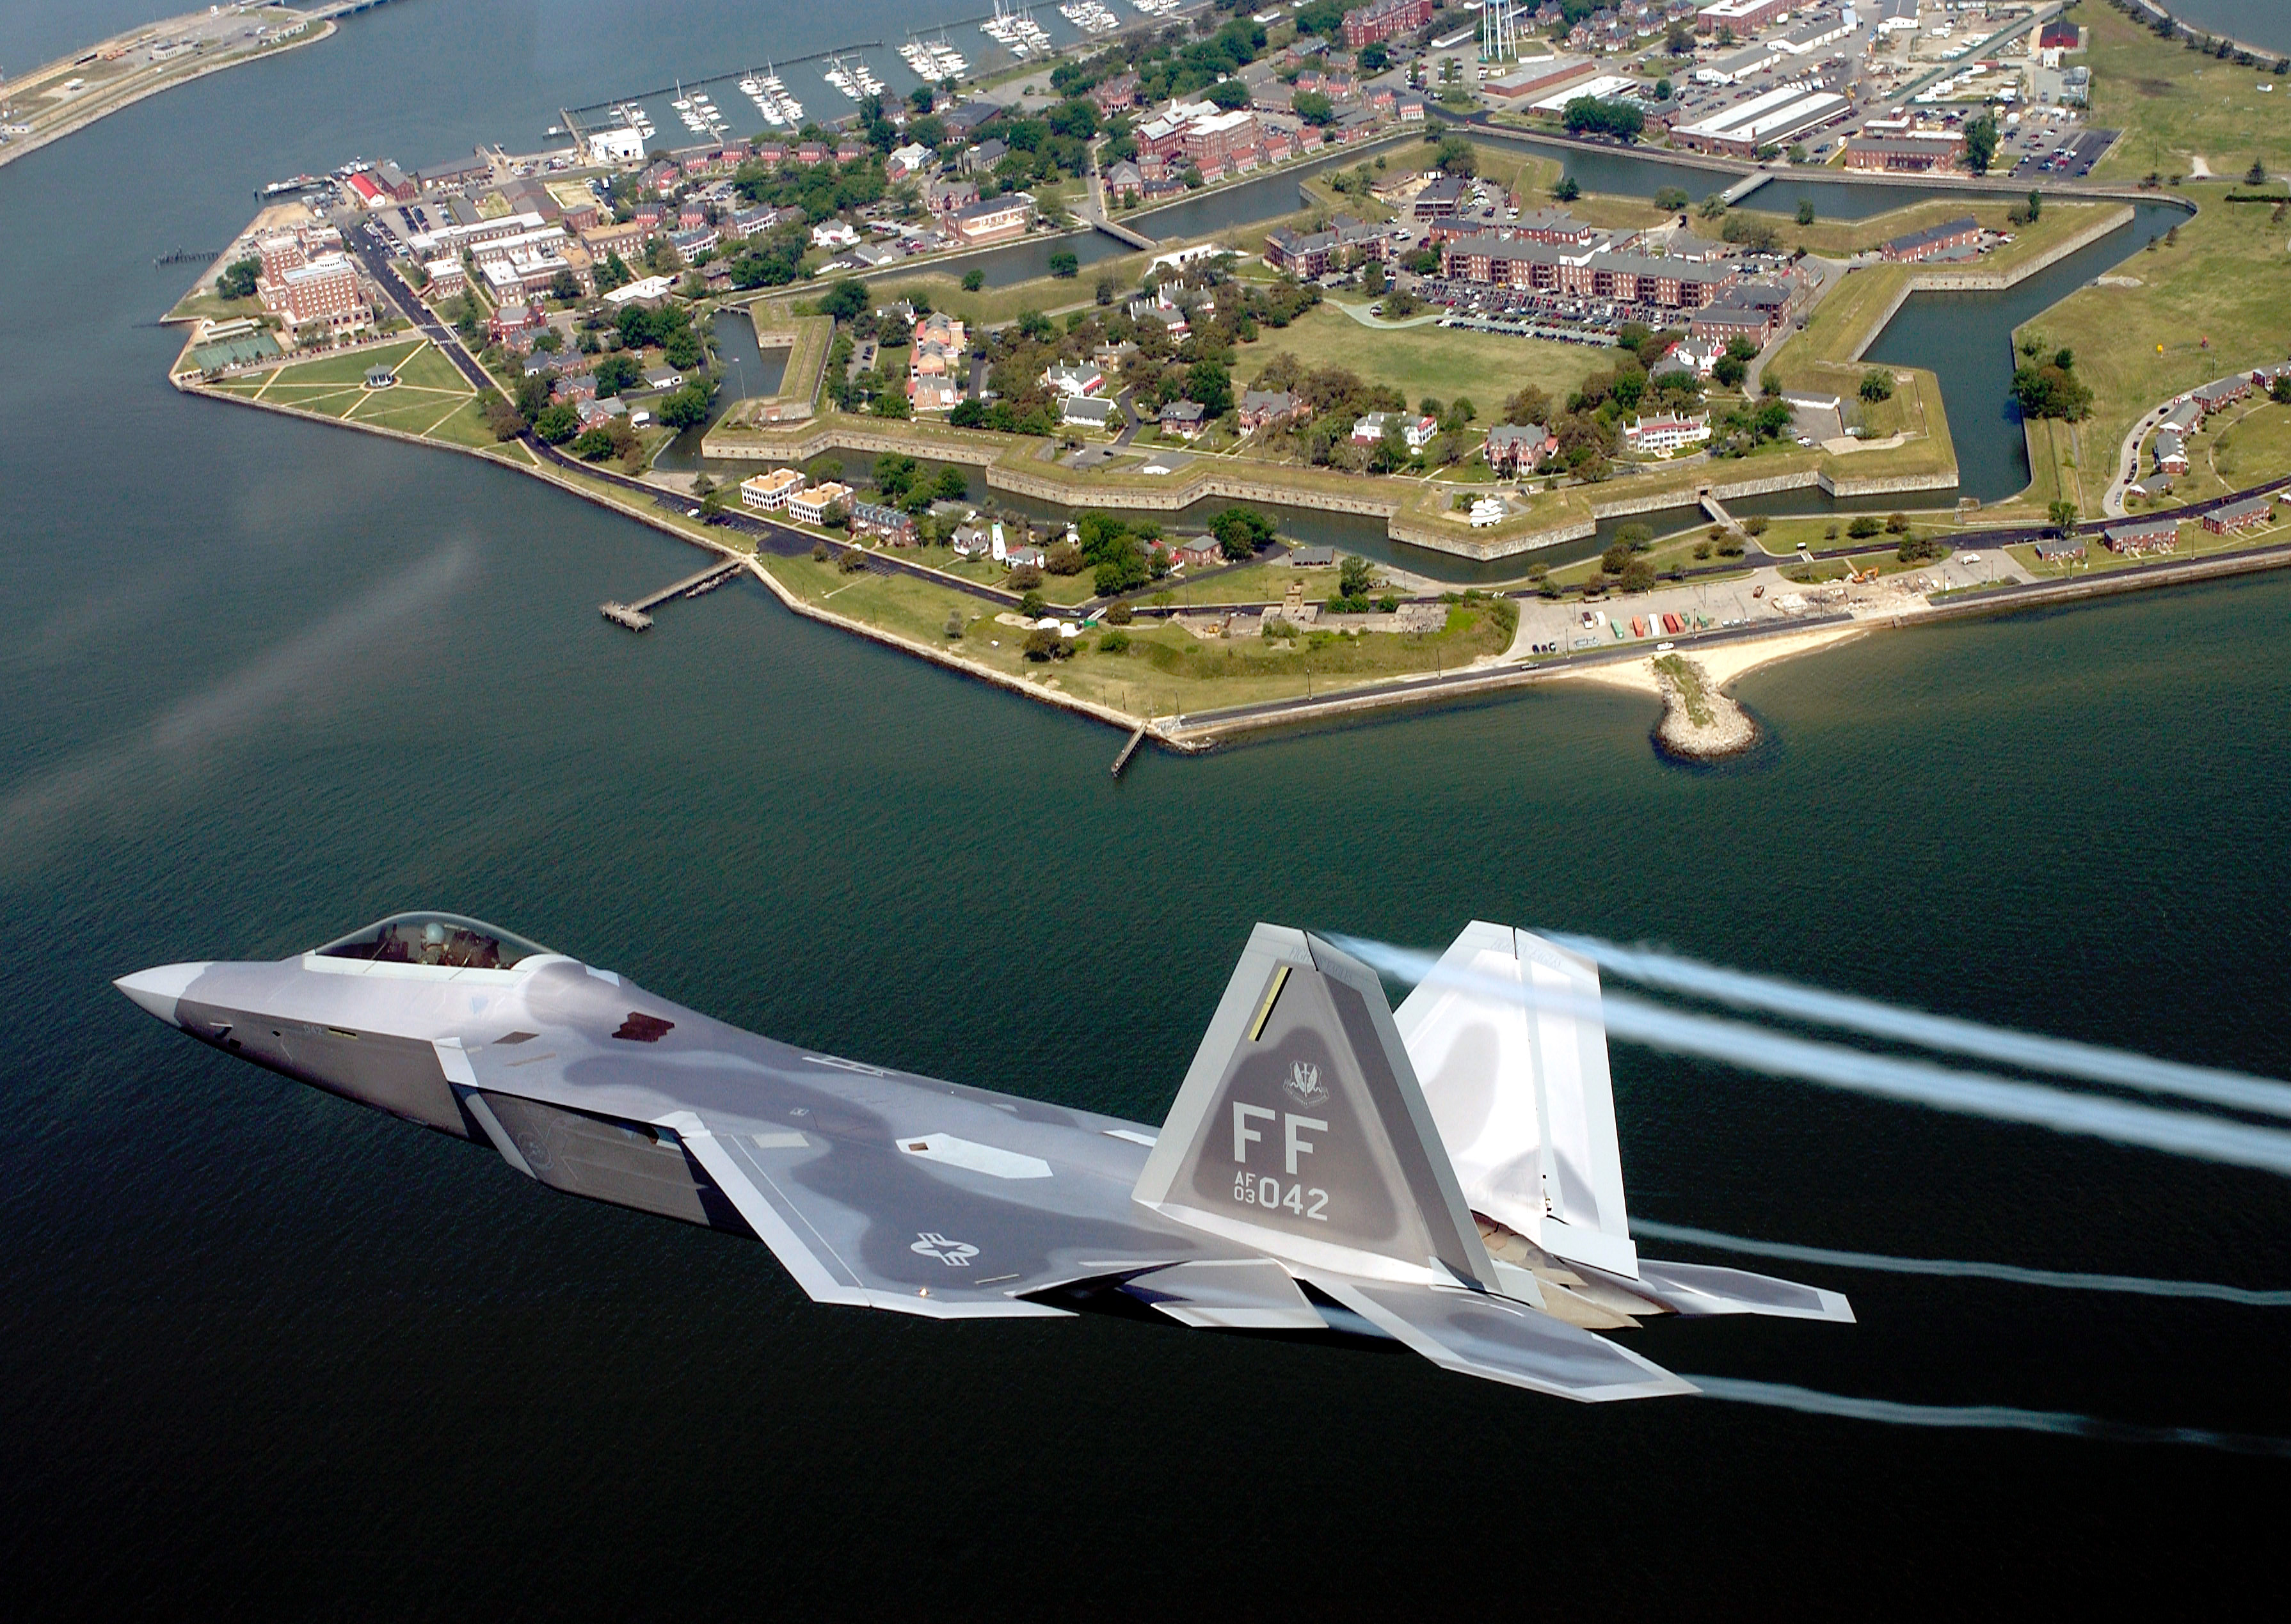 F-22 Raptor > Joint Base Langley-Eustis > Show” loading=”lazy” style=”width:100%;text-align:center;” /><small style=